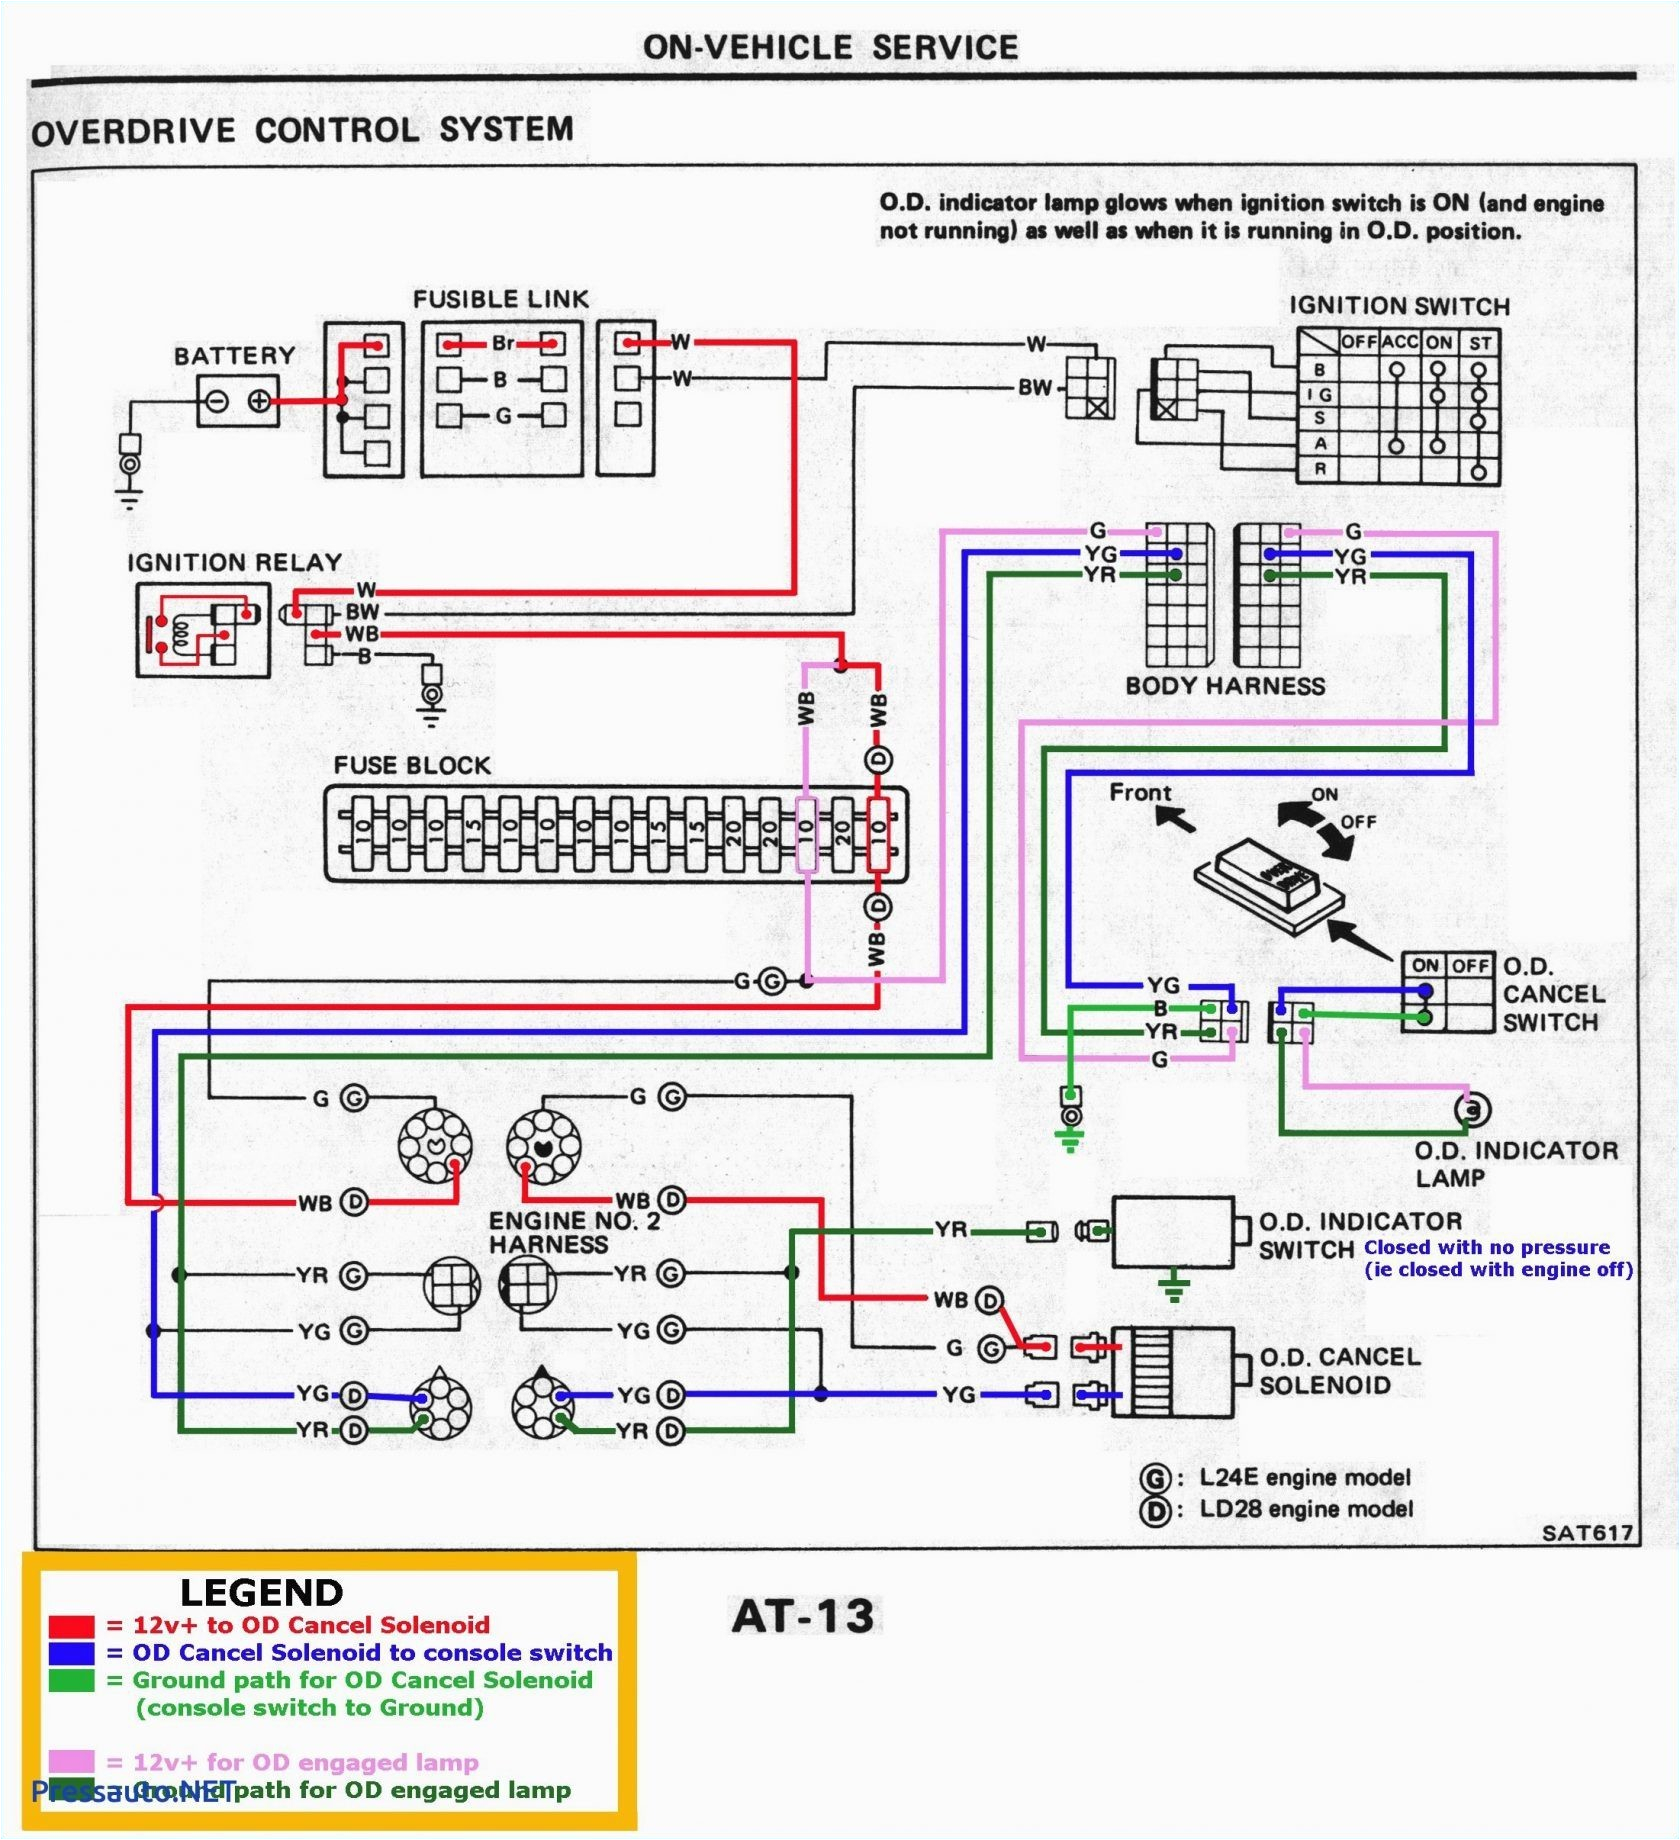 1992 jeep wrangler ignition switch wiring wiring diagram toolbox 1992 jeep wrangler ignition switch wiring